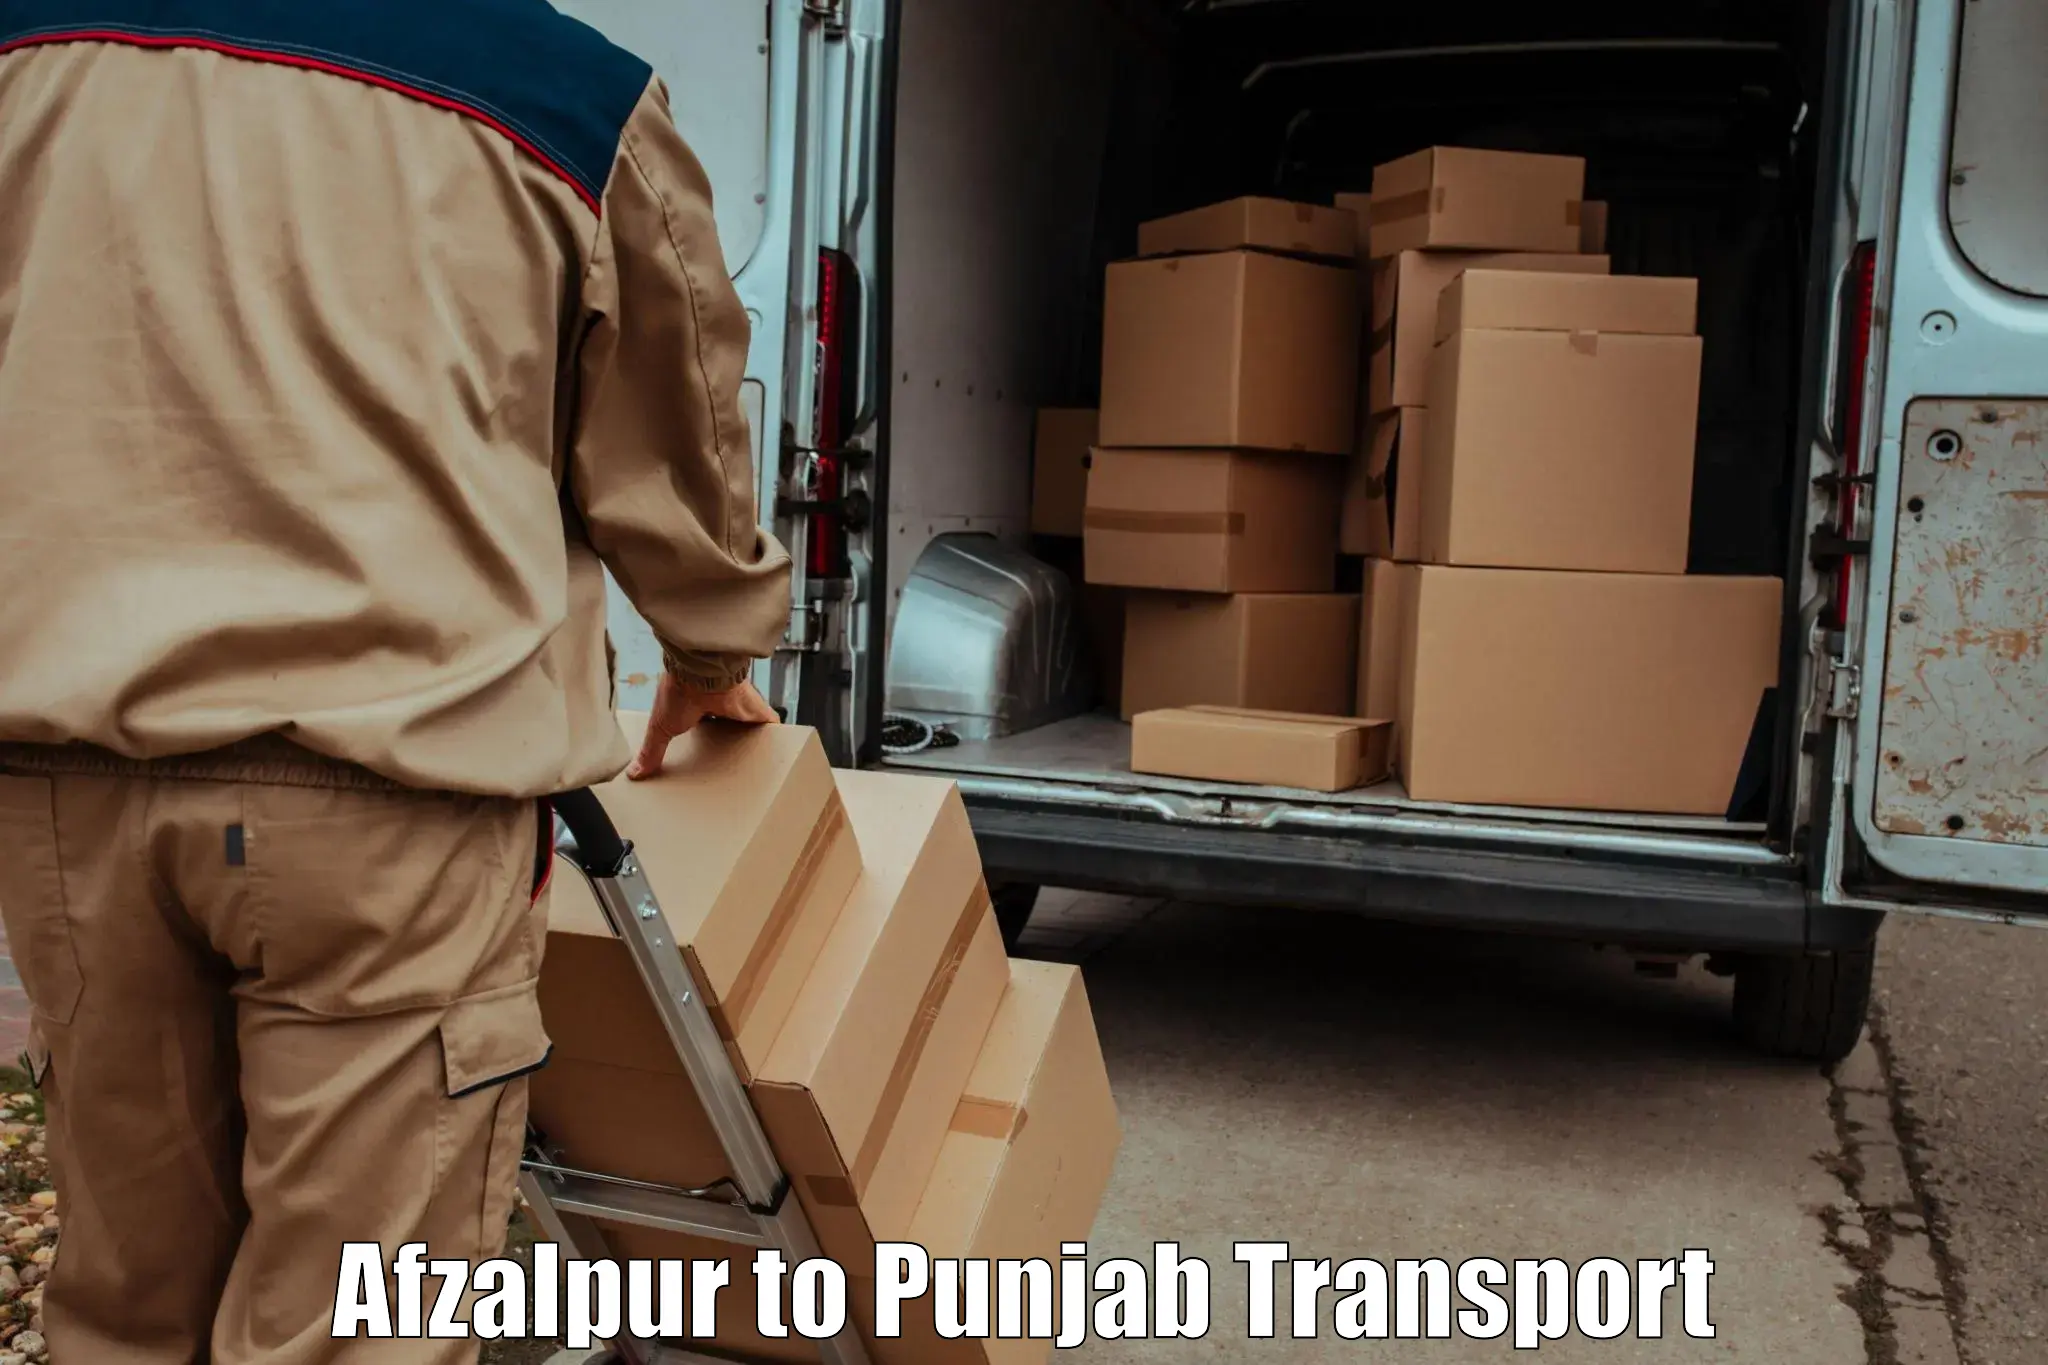 Express transport services Afzalpur to Moga